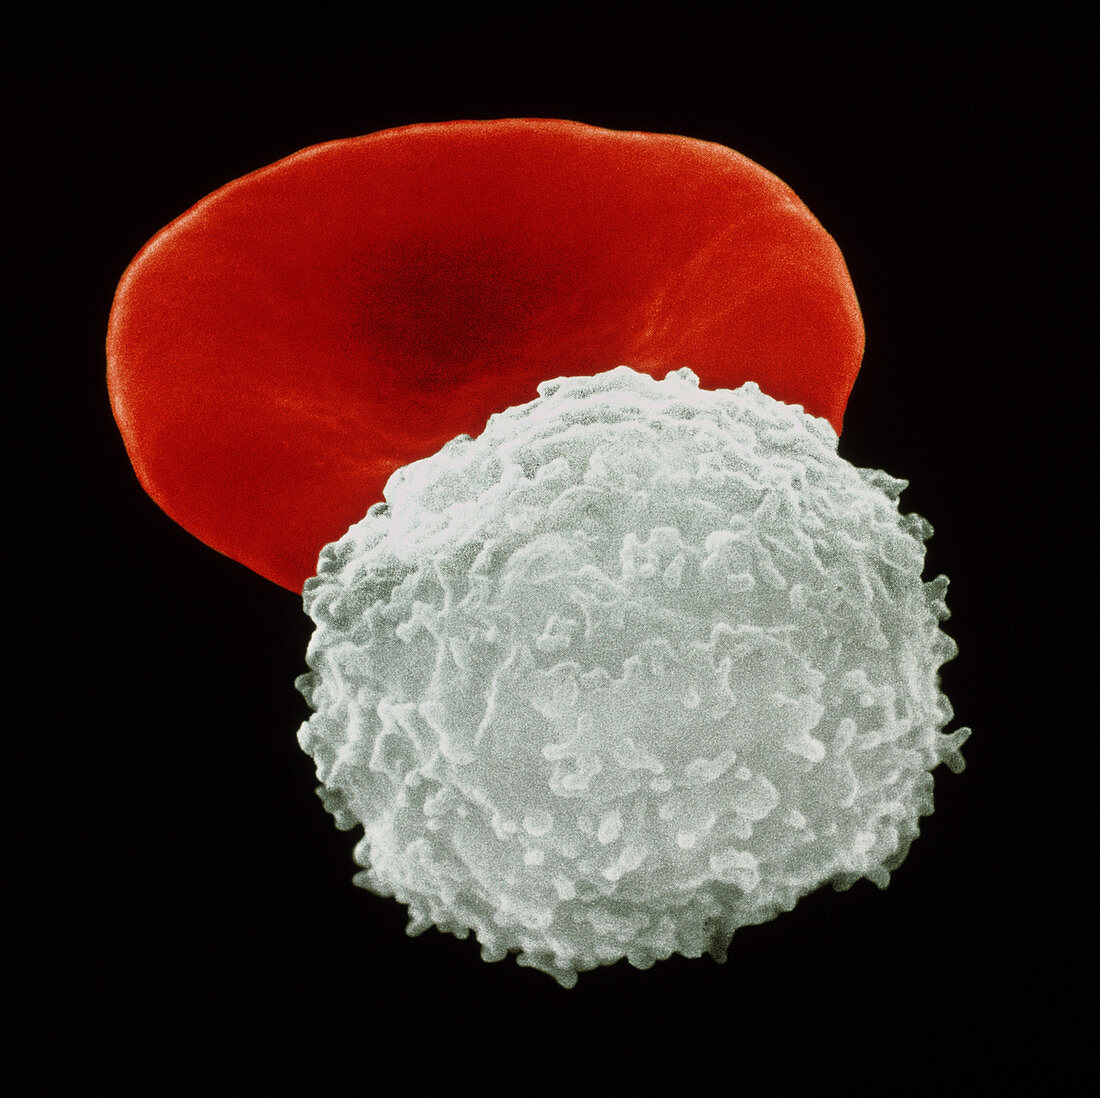 Coloured SEM of a red and white blood cel